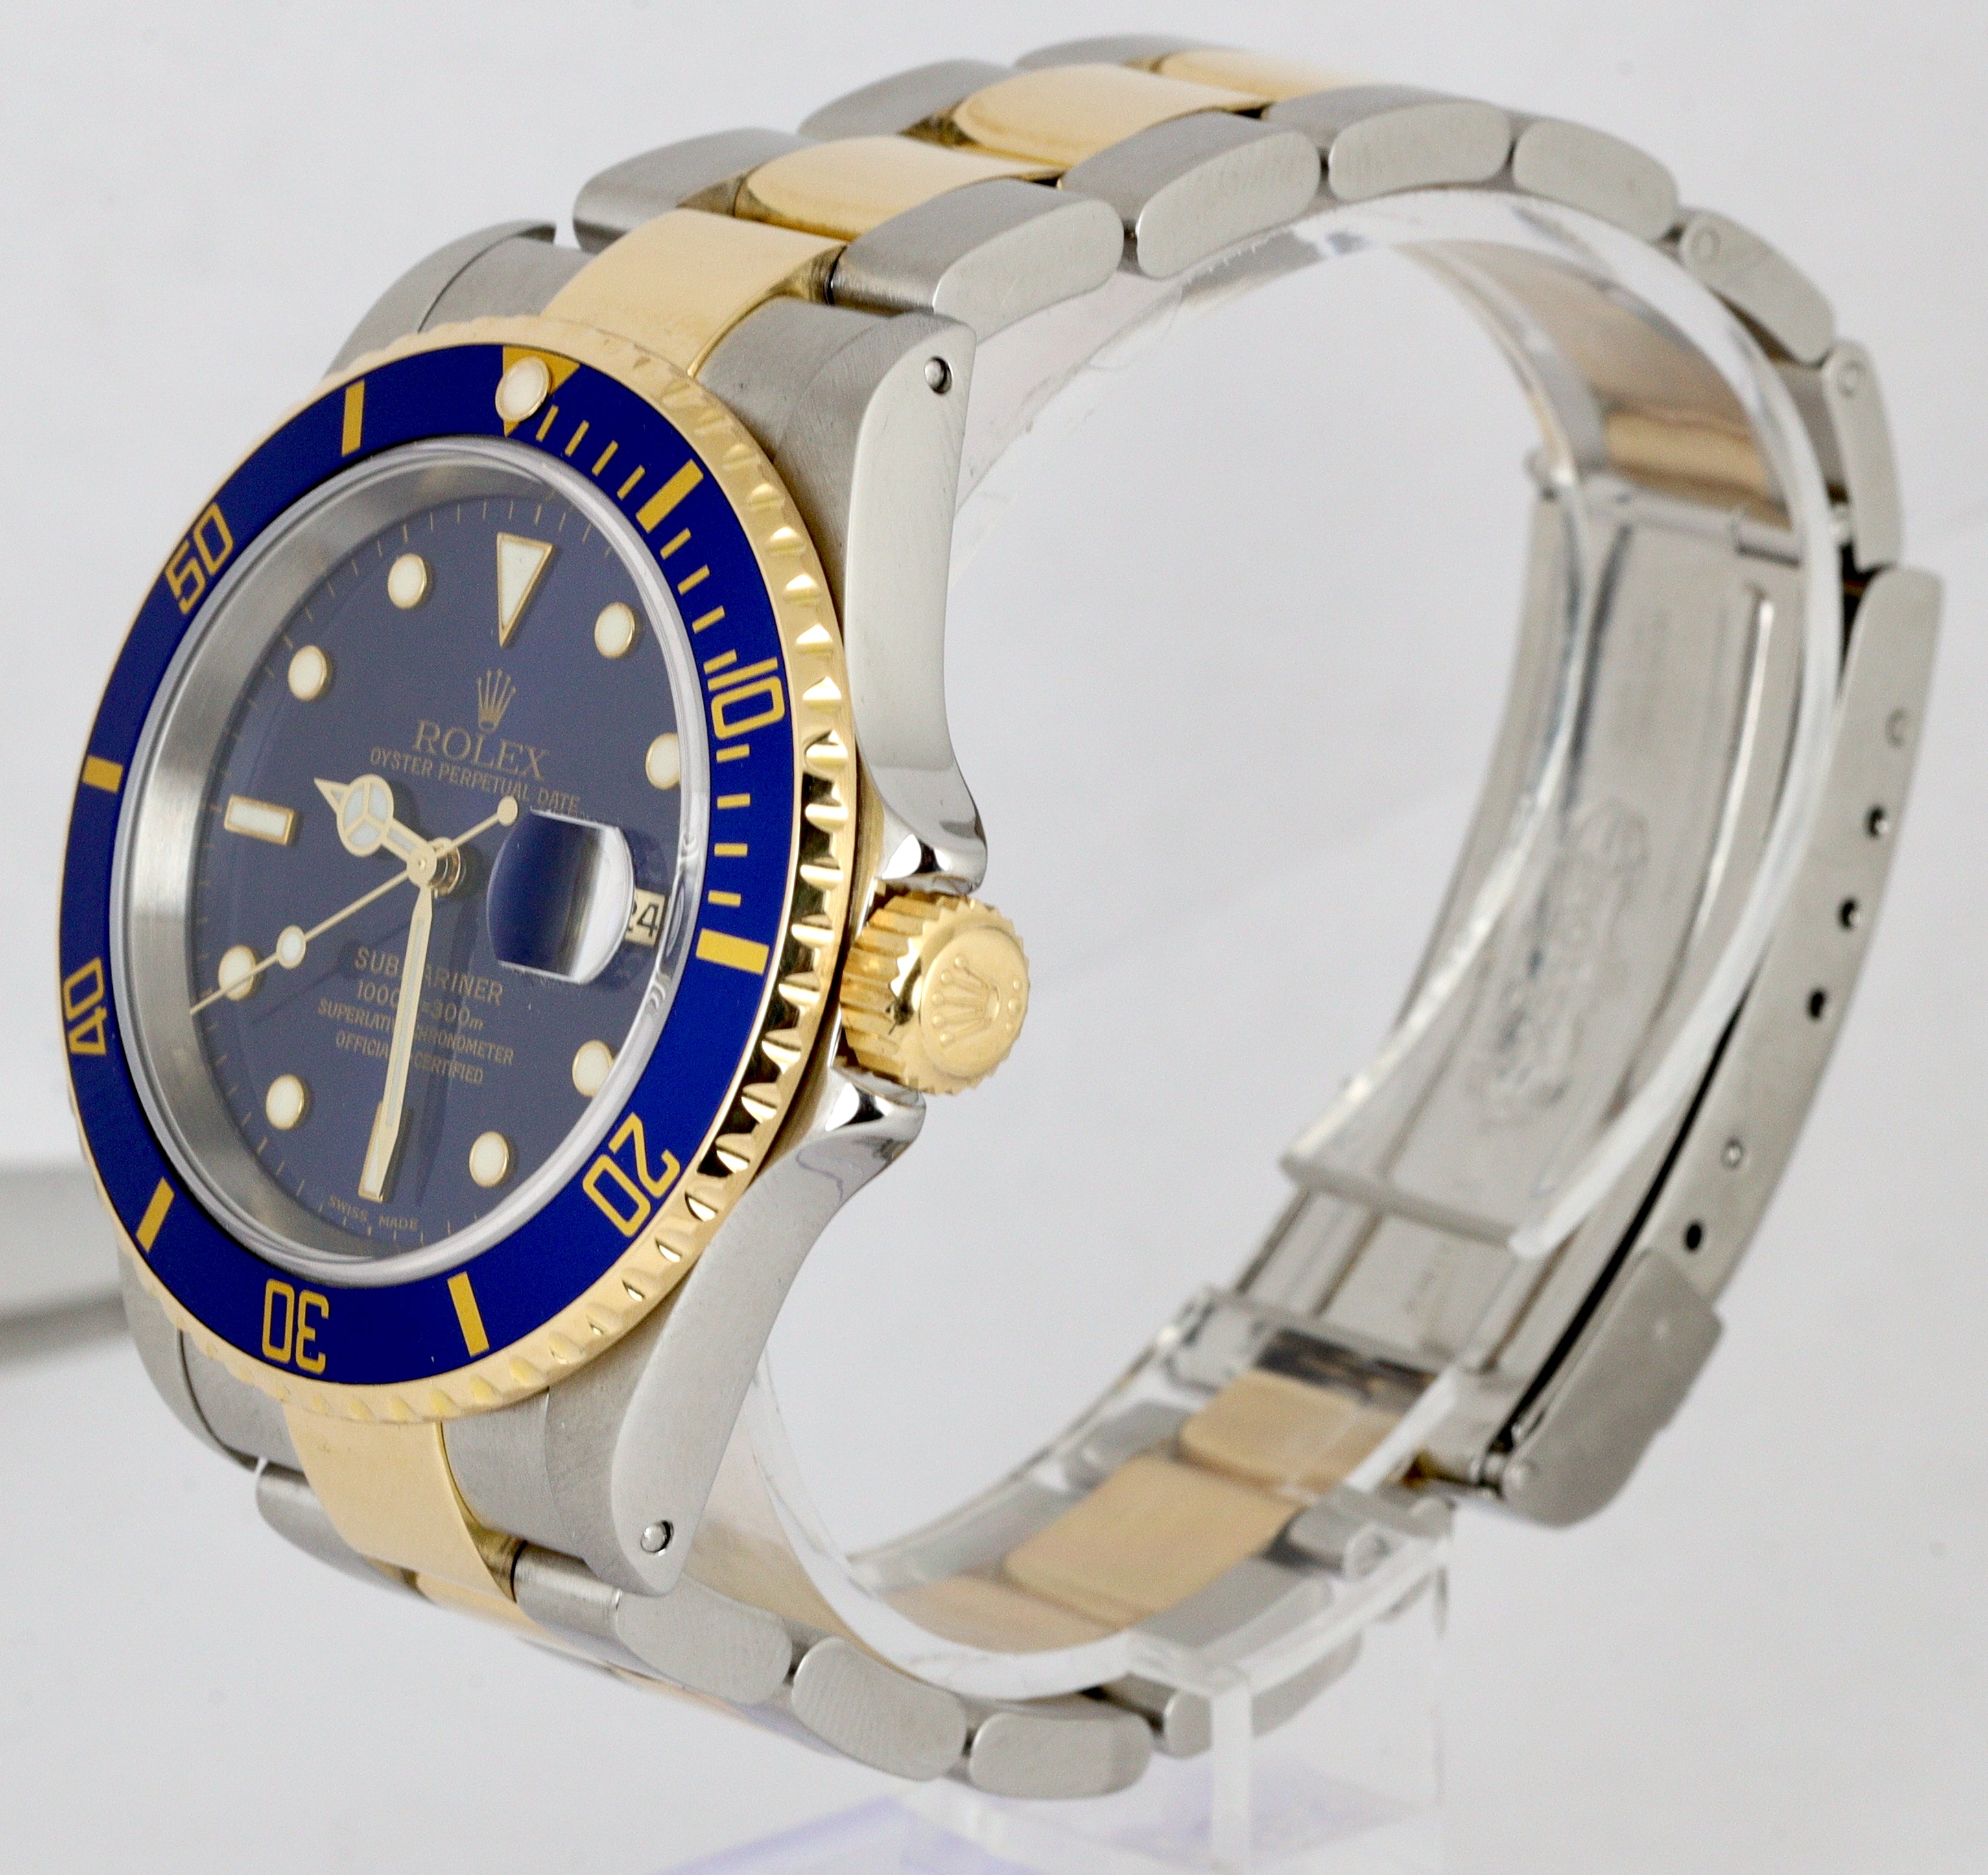 2021 ROLEX SERVICE RSC Submariner Date Blue 16613 Two-Tone 18K Gold SEL 2000